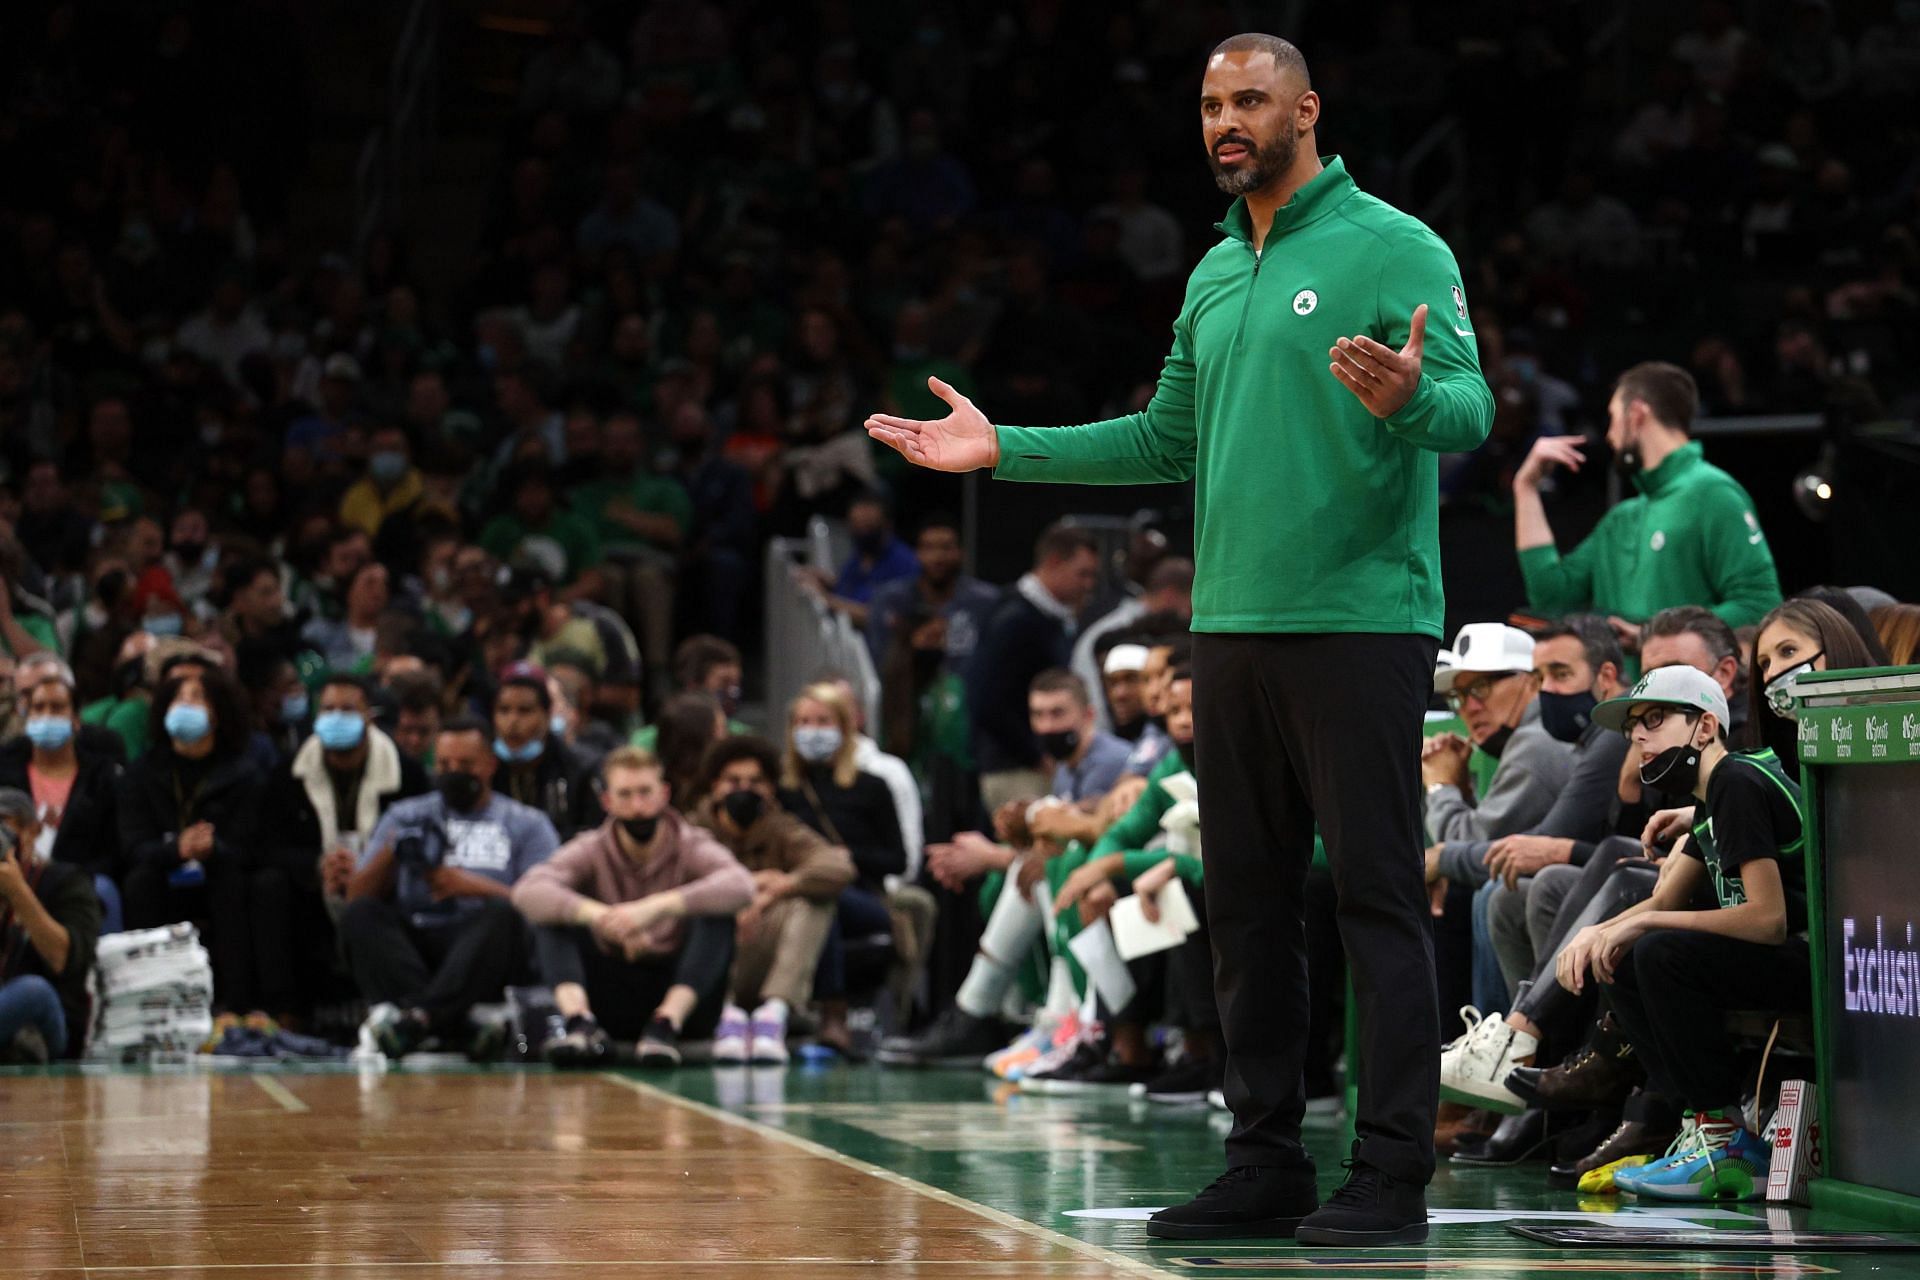 Boston Celtics head coach Ime Udoka reacts during the first quarter of the game against the Toronto Raptors at TD Garden on November 10, 2021 in Boston, Massachusetts.